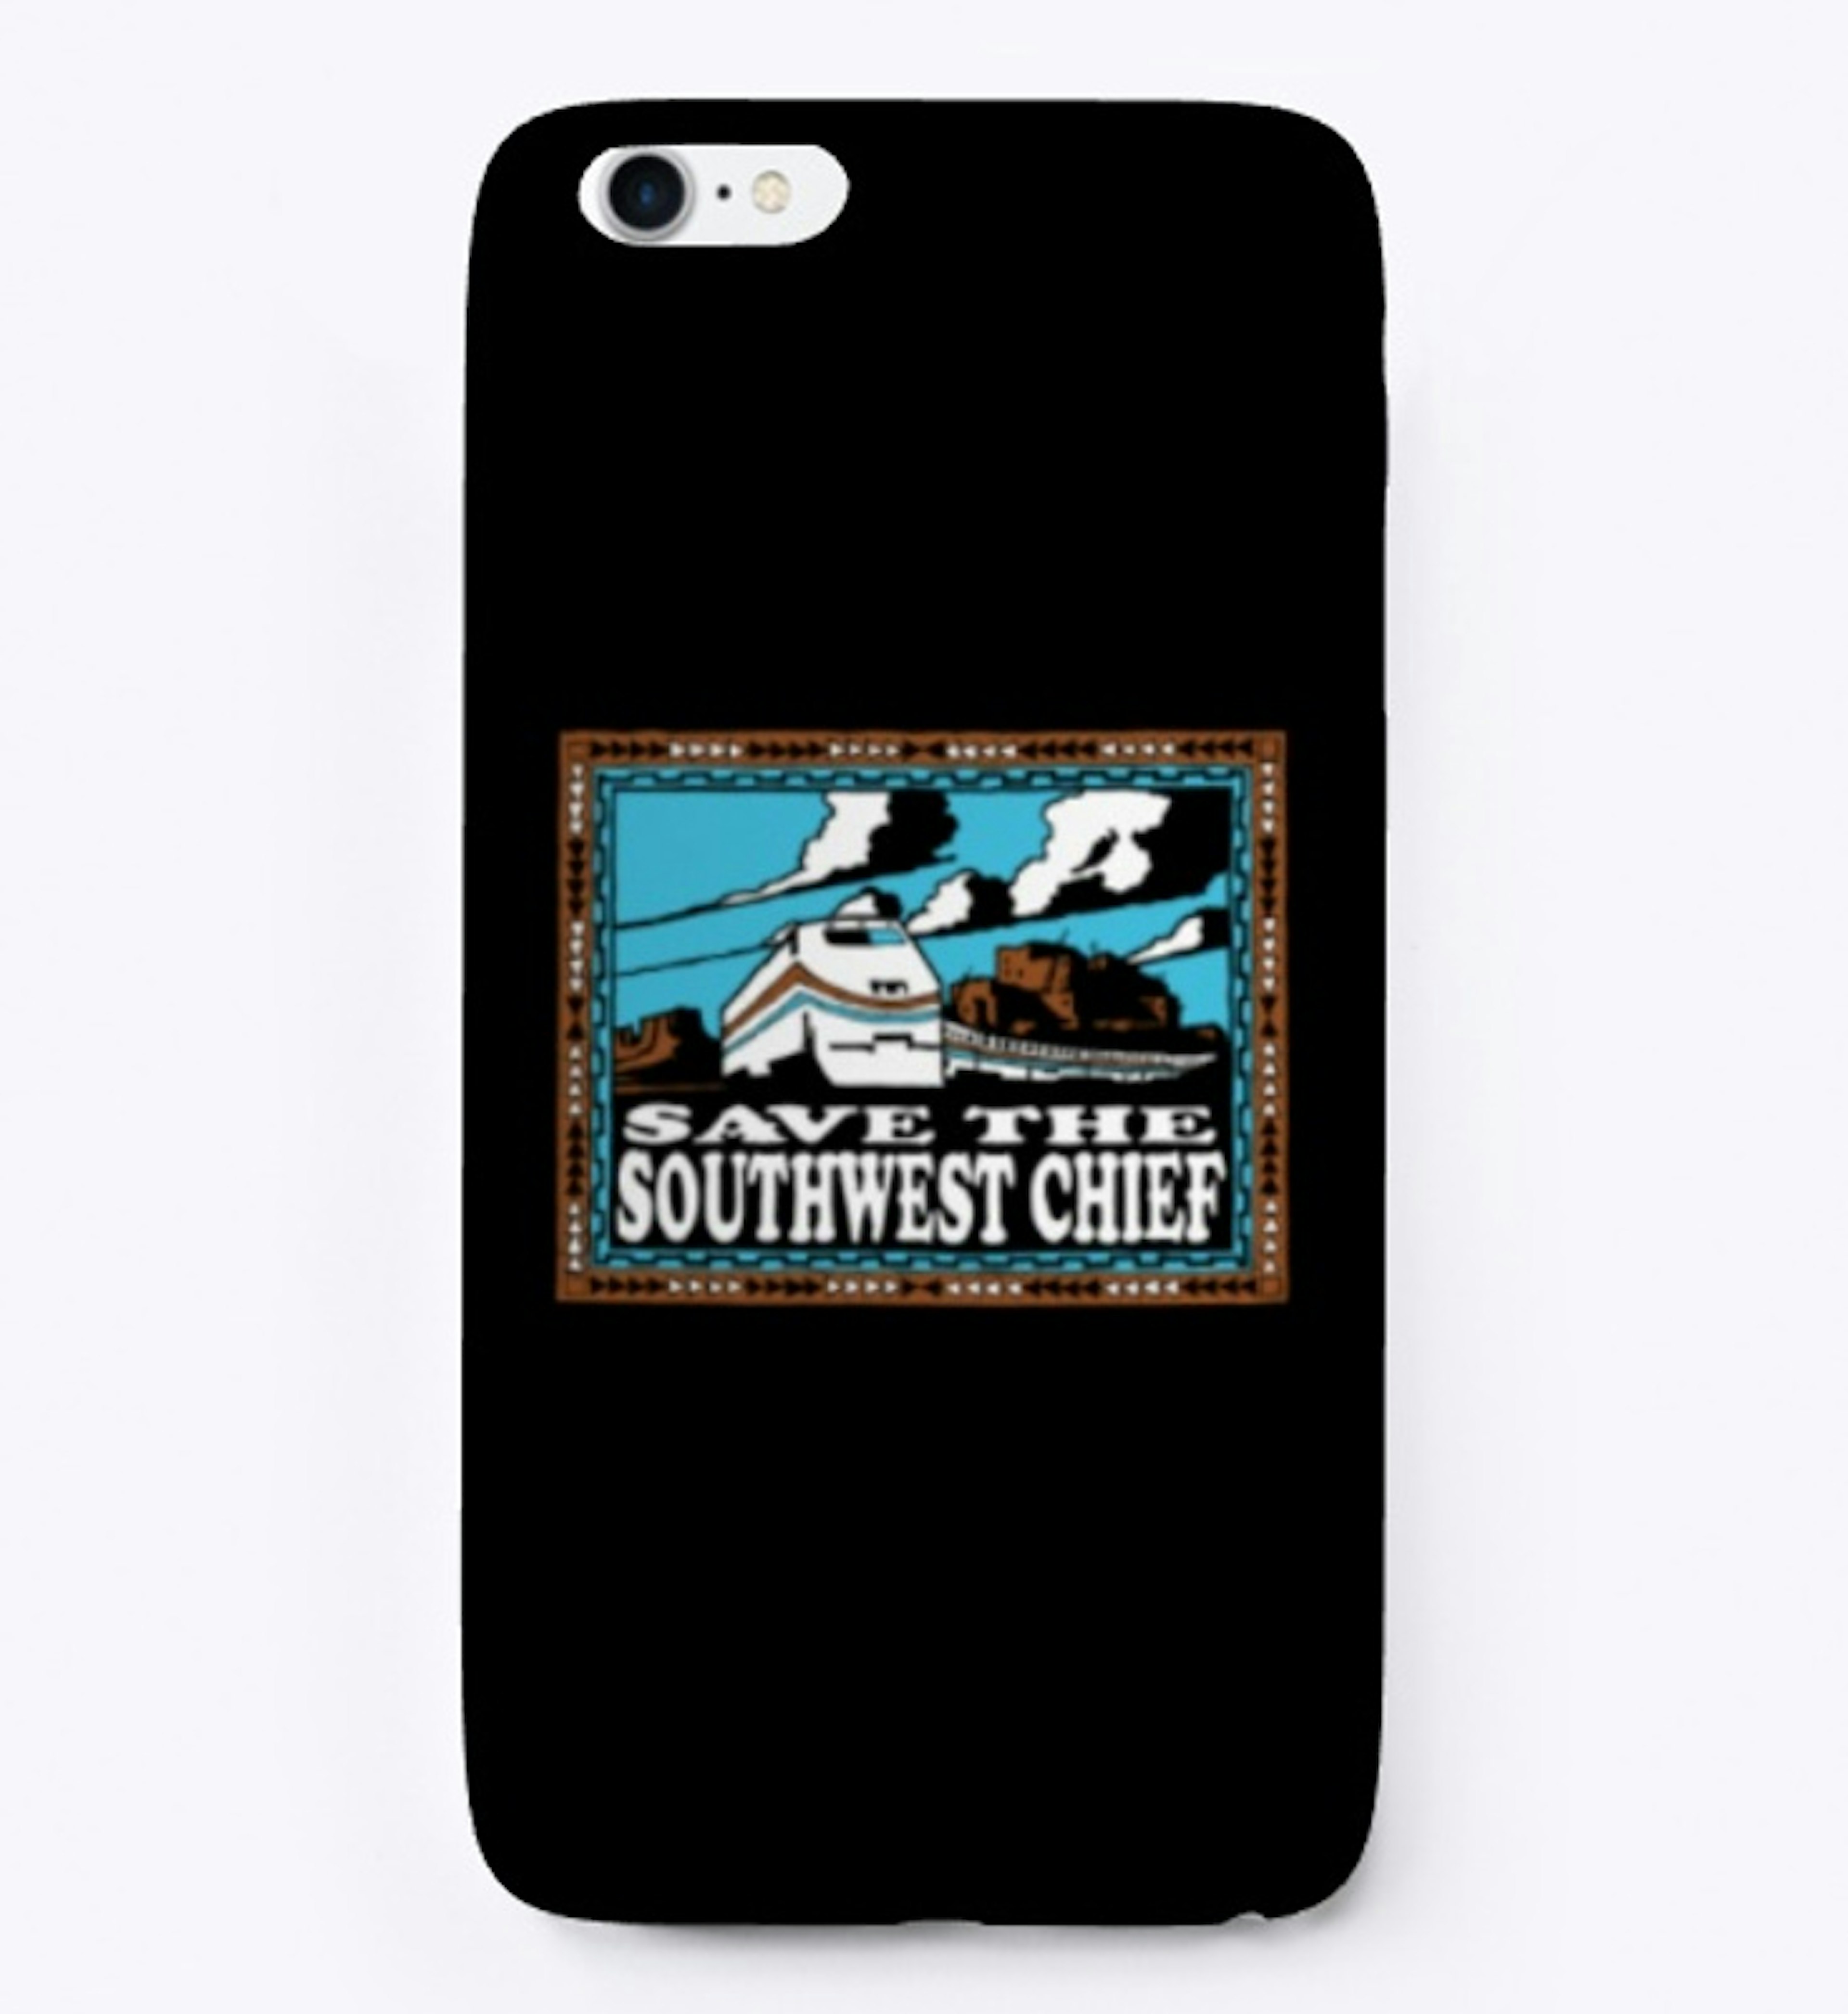 SAVE THE SOUTHWEST CHIEF